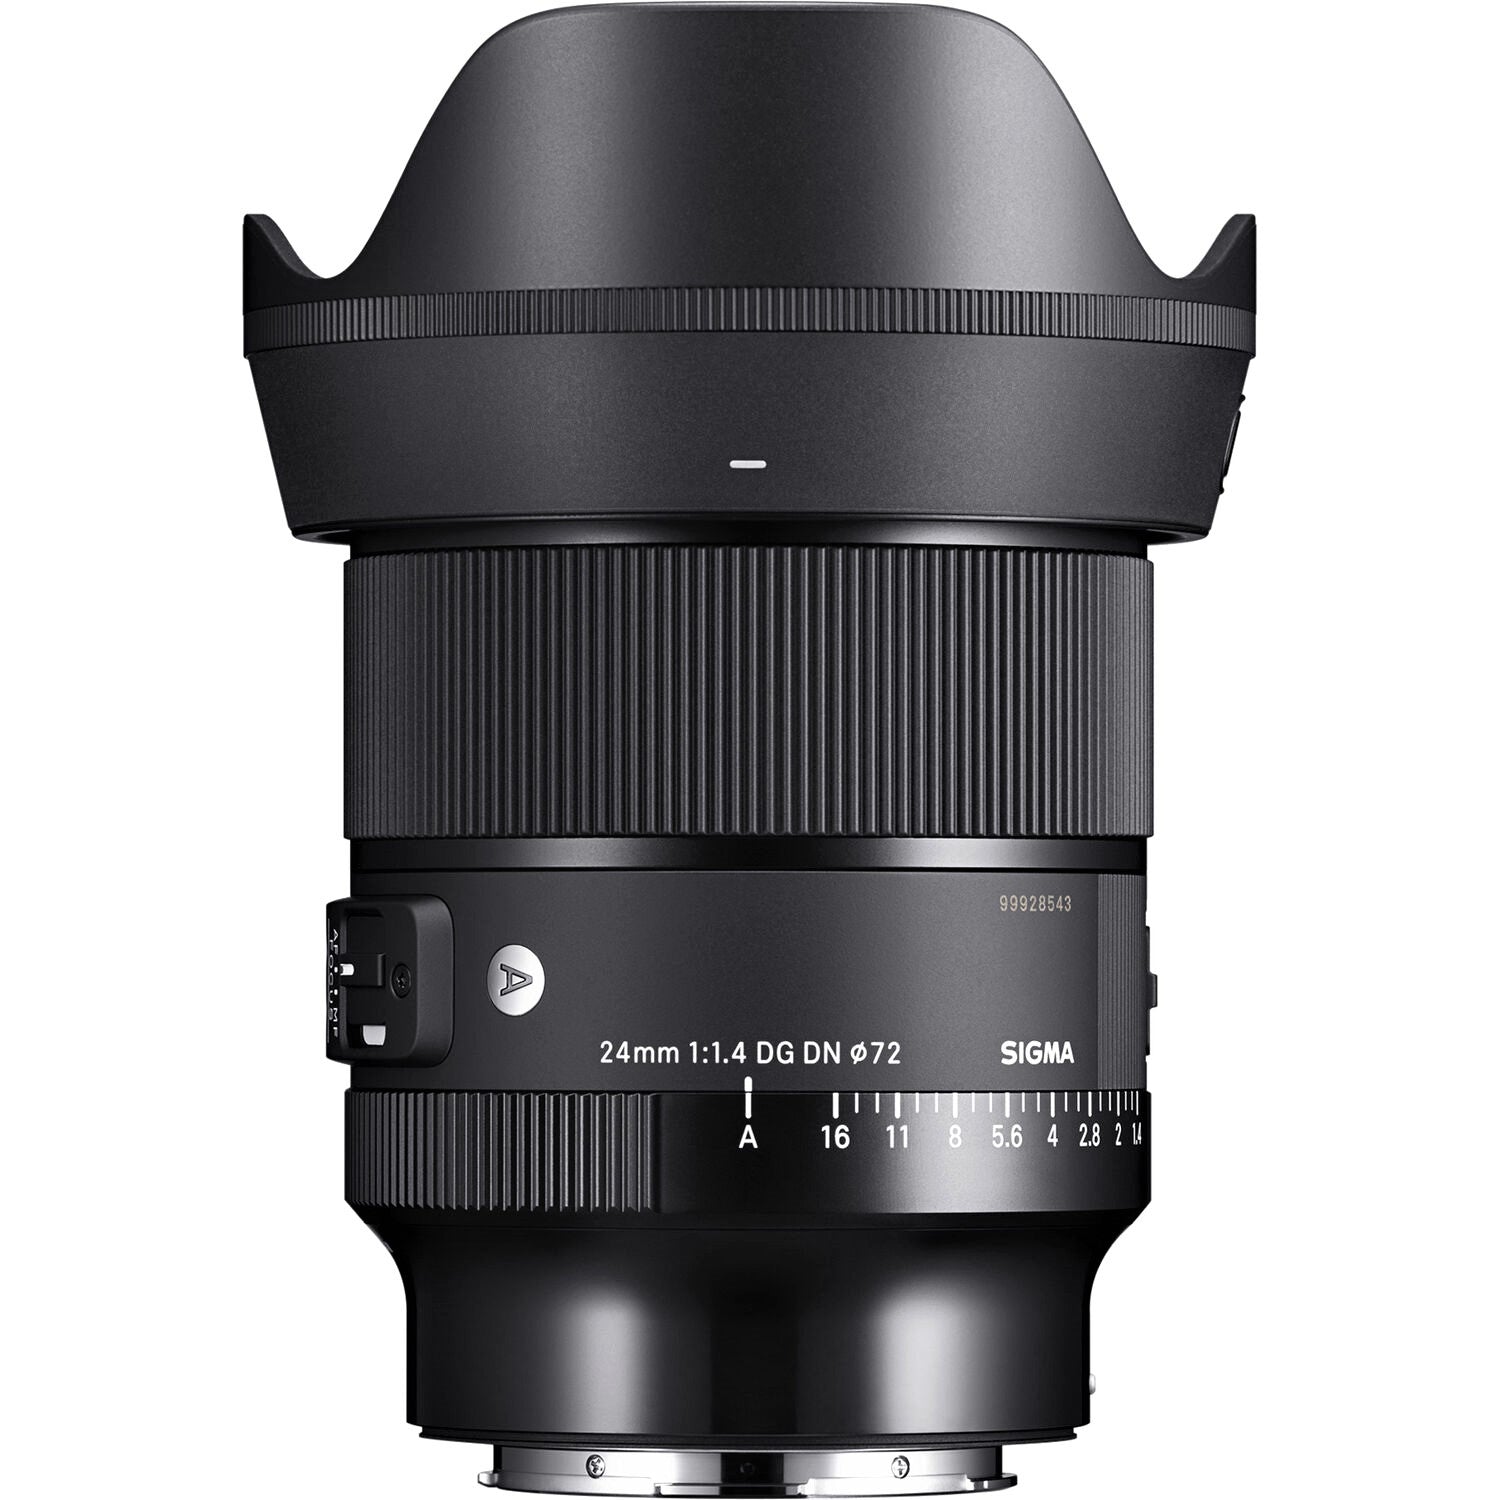 Sigma 24mm F1.4 DG DN Art Lens (Leica L Mount) with Attached Lens Hood on the Top